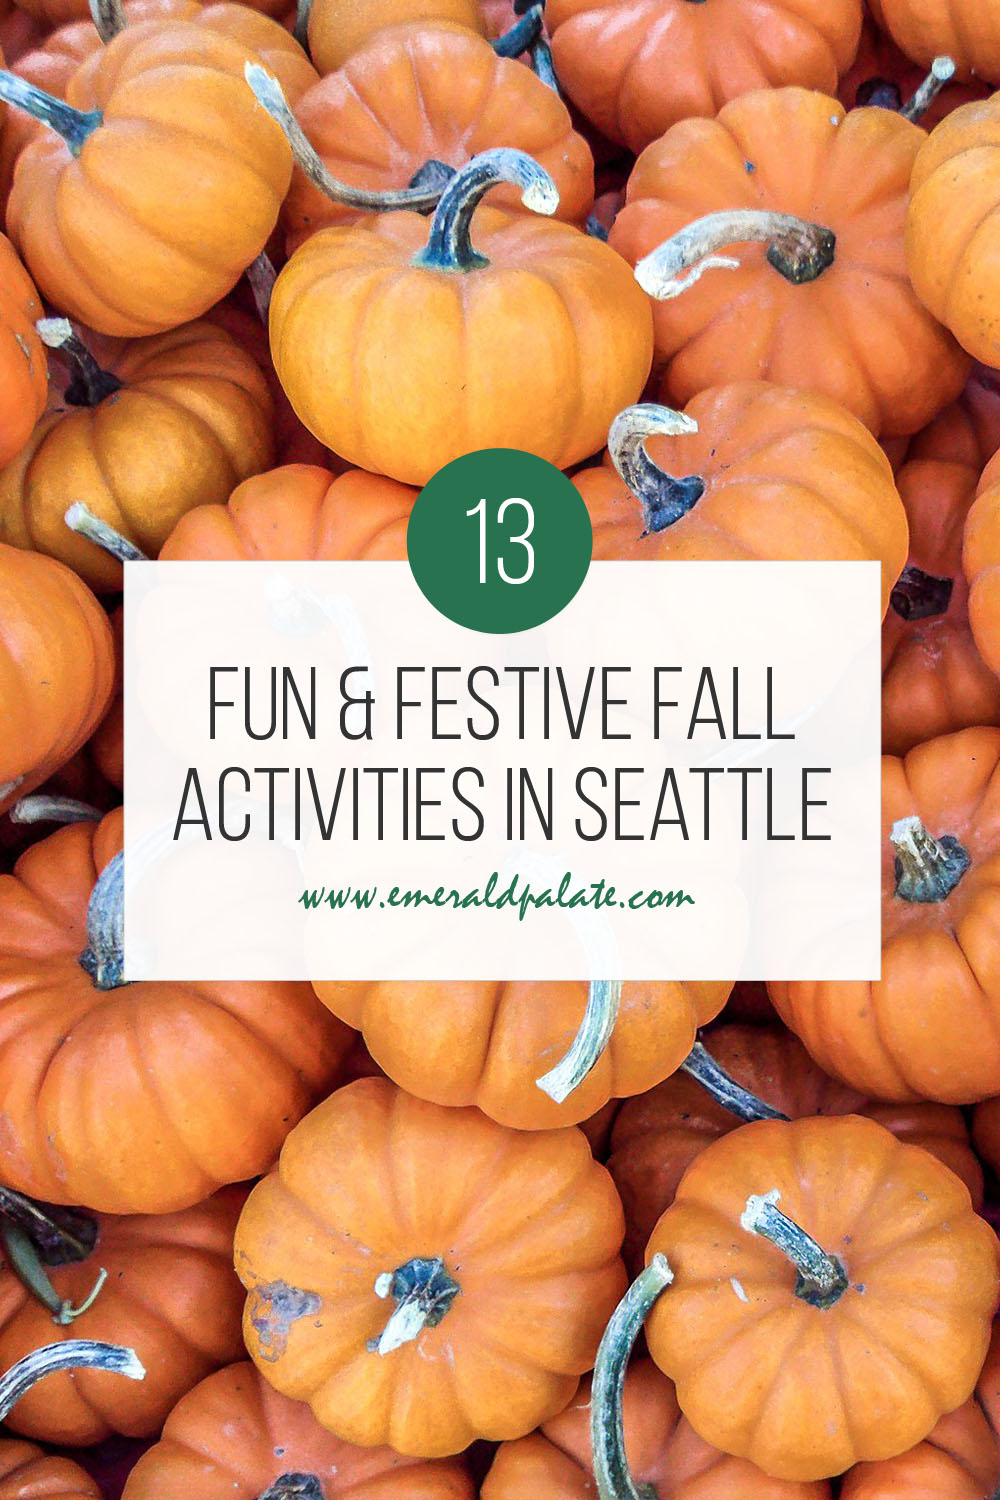 Fall in Seattle is one of the best seasons. From fall colors in Seattle, pumpkin patches, corn mazes, u-pick apple orchards, and fall getaways in Washington state, here are all the best things to do during fall in Seattle.